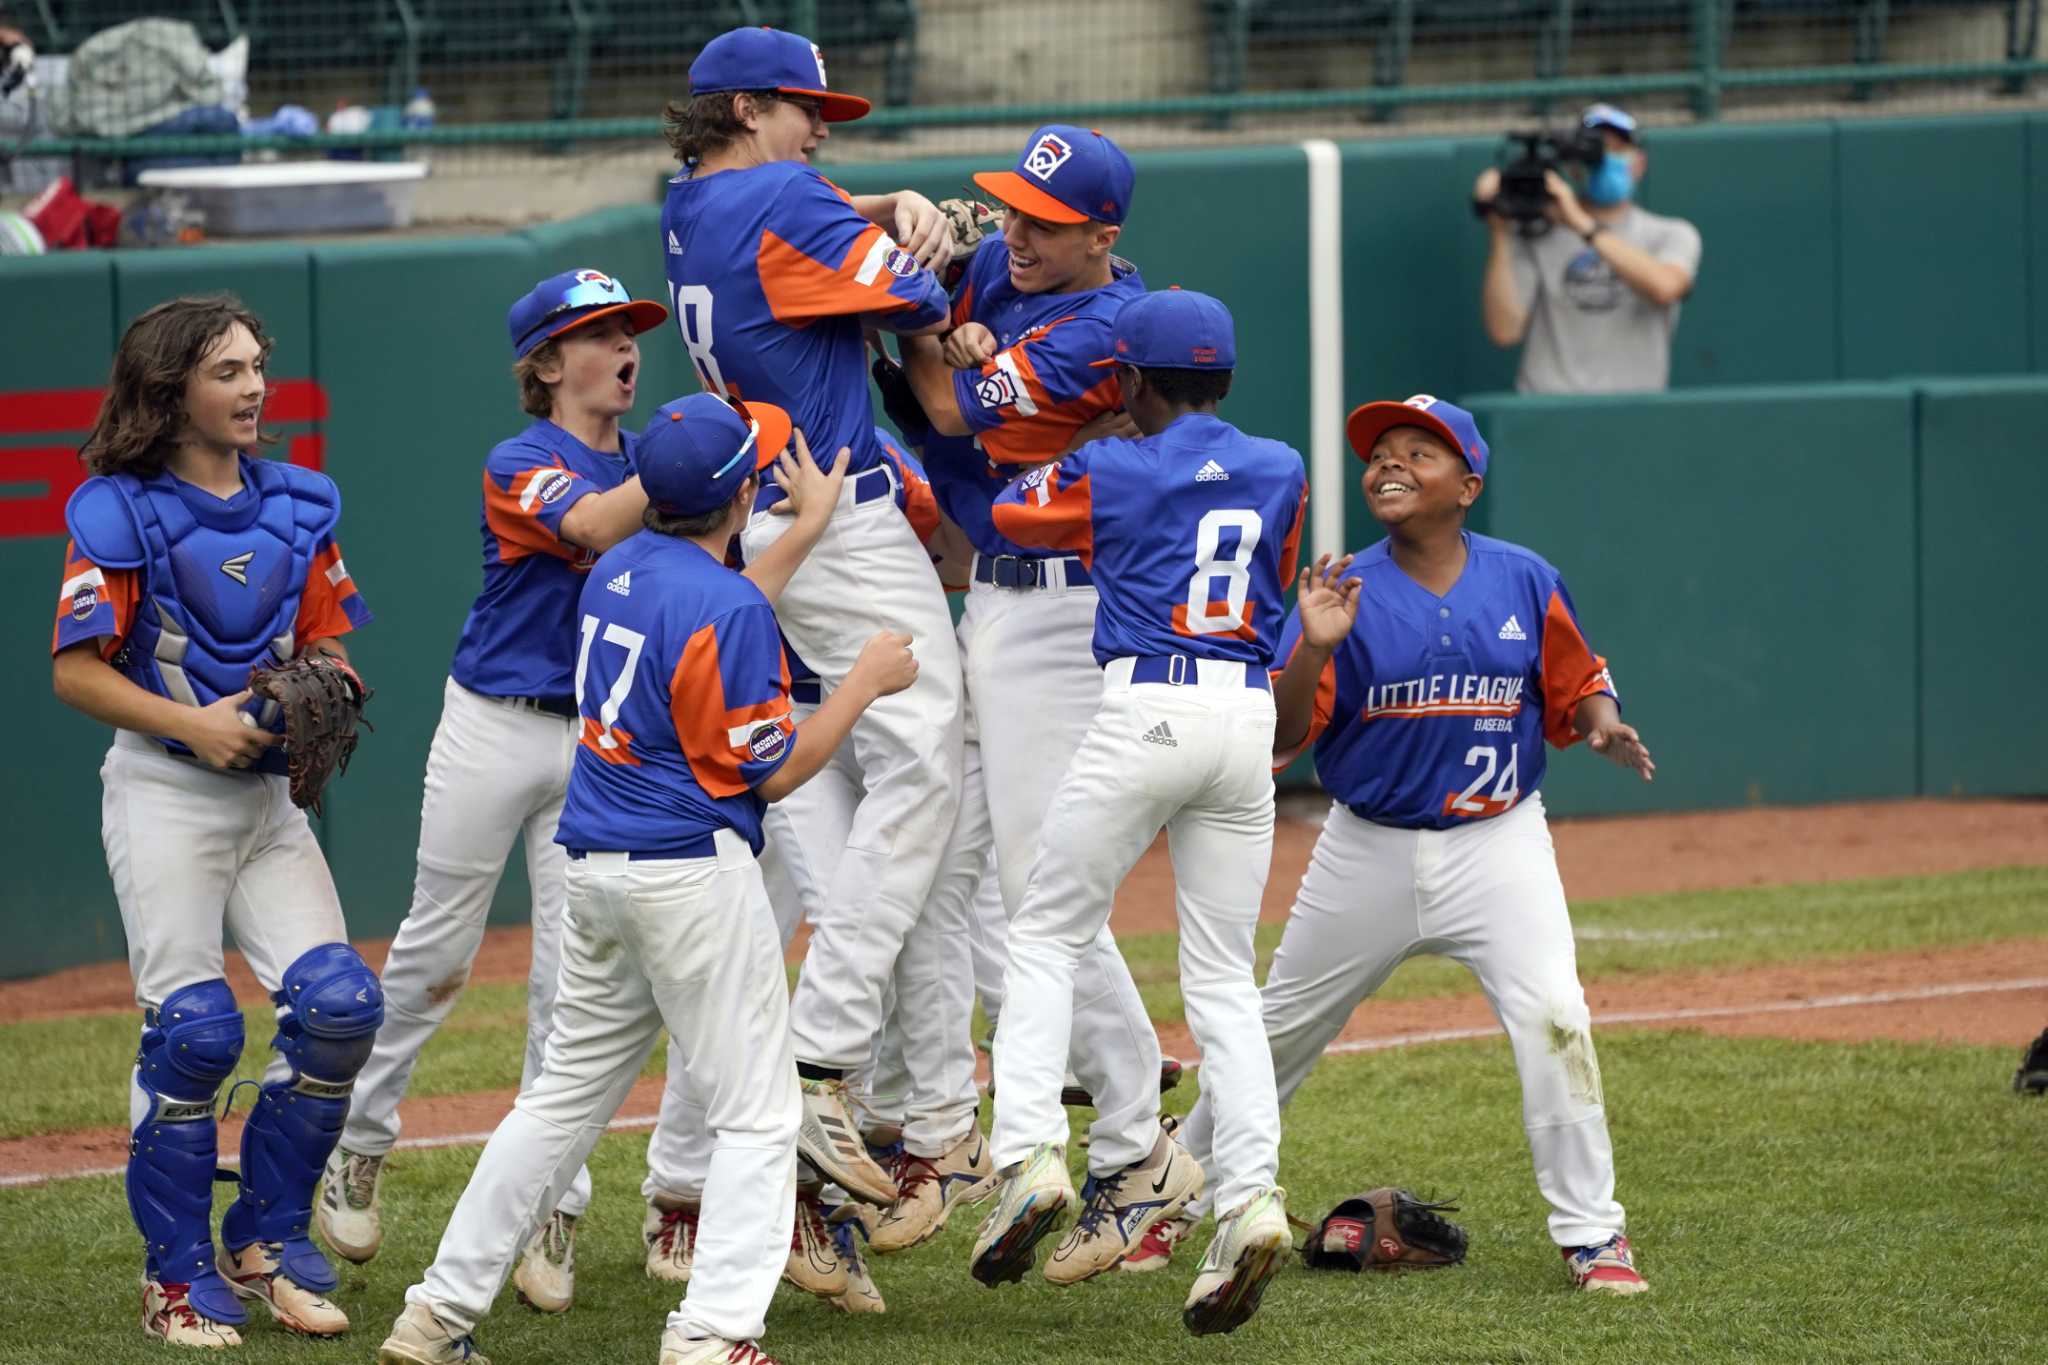 Michigan's Little League title gives us all a reason to smile